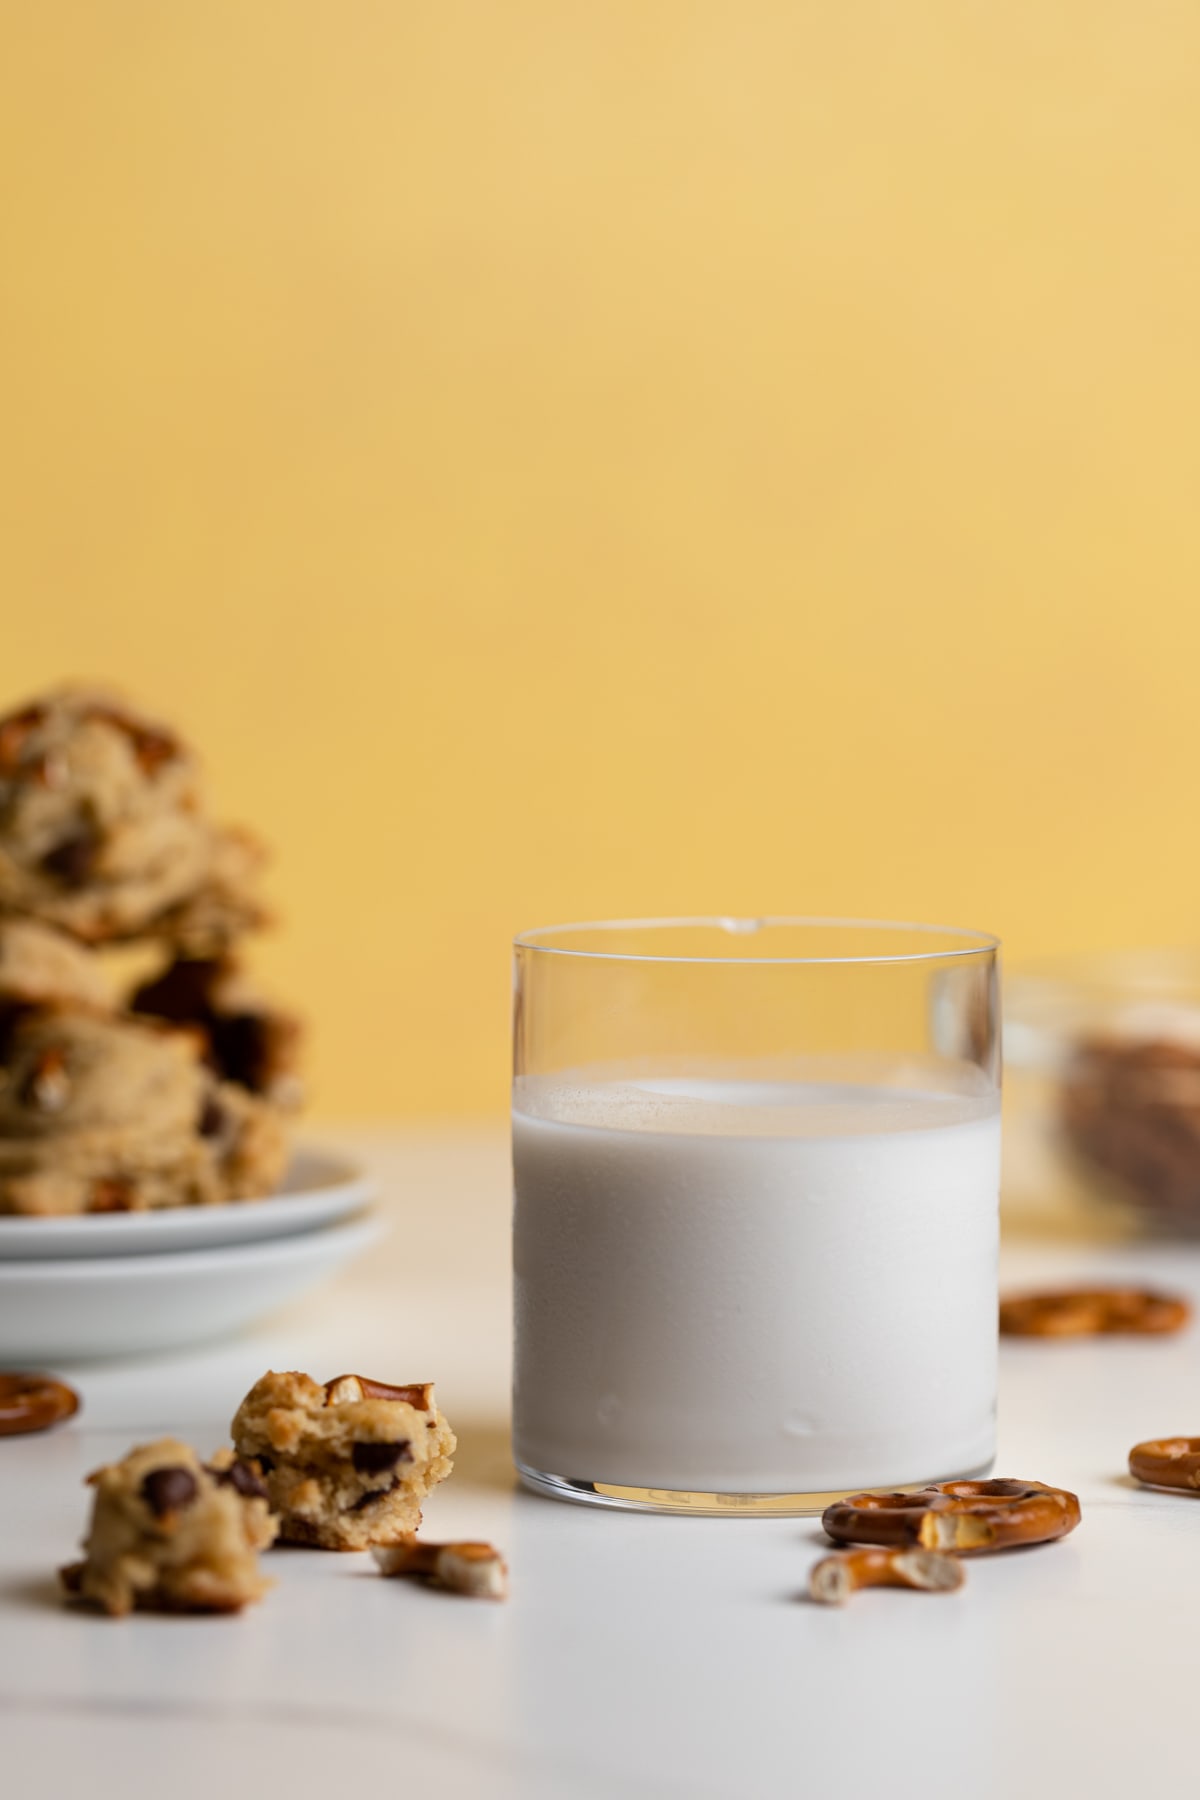 Chunky Vegan Chocolate Chip and Pretzel Cookies with a glass of milk.